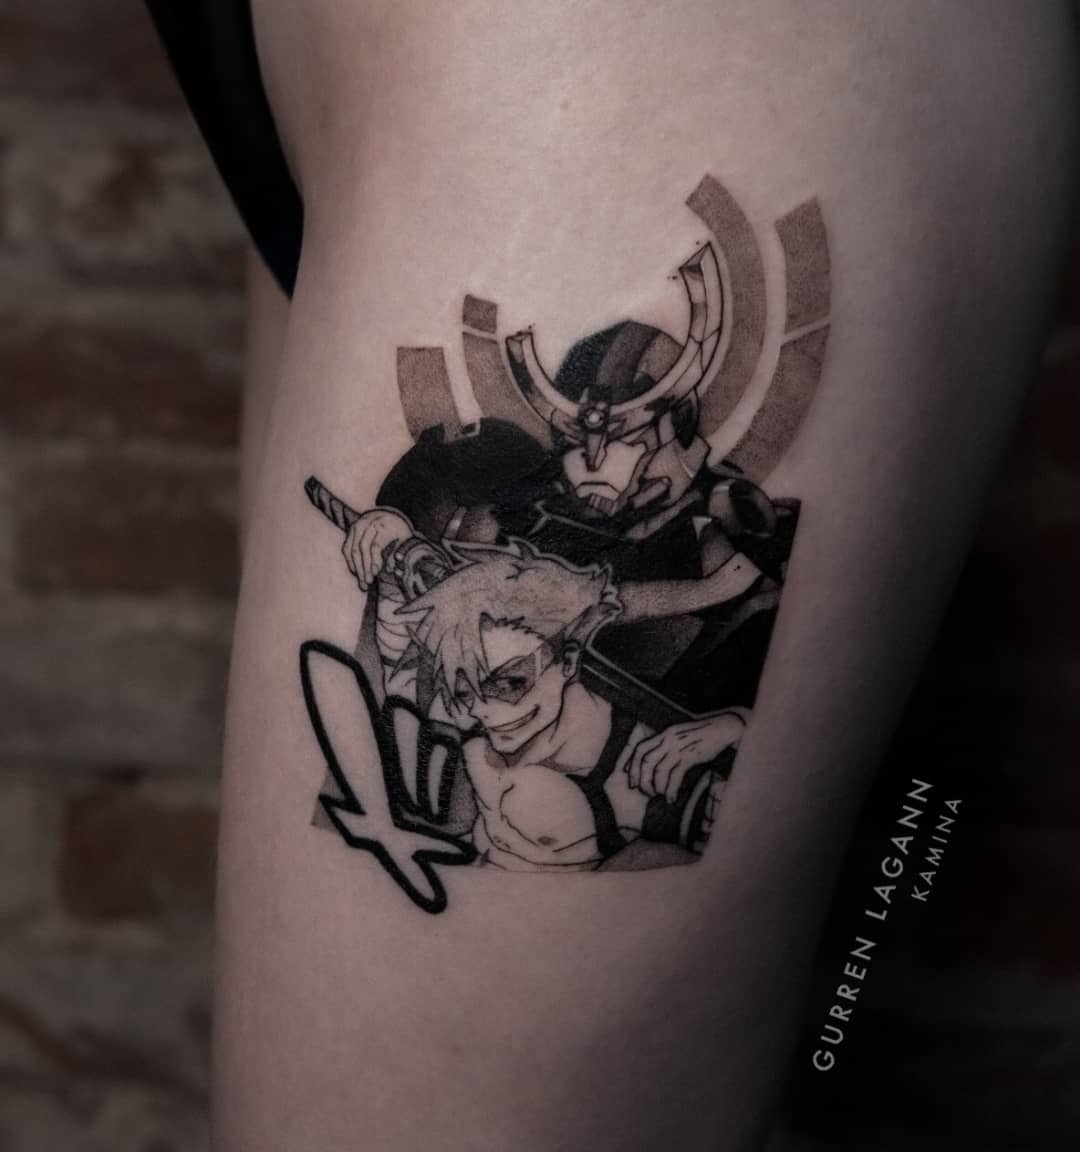 Posted on gurren lagann subreddit awhile ago but thought I would share it  here too ROW ROW FIGHT DA POWAH  Cool tattoos Men tattoos arm sleeve  Tattoos